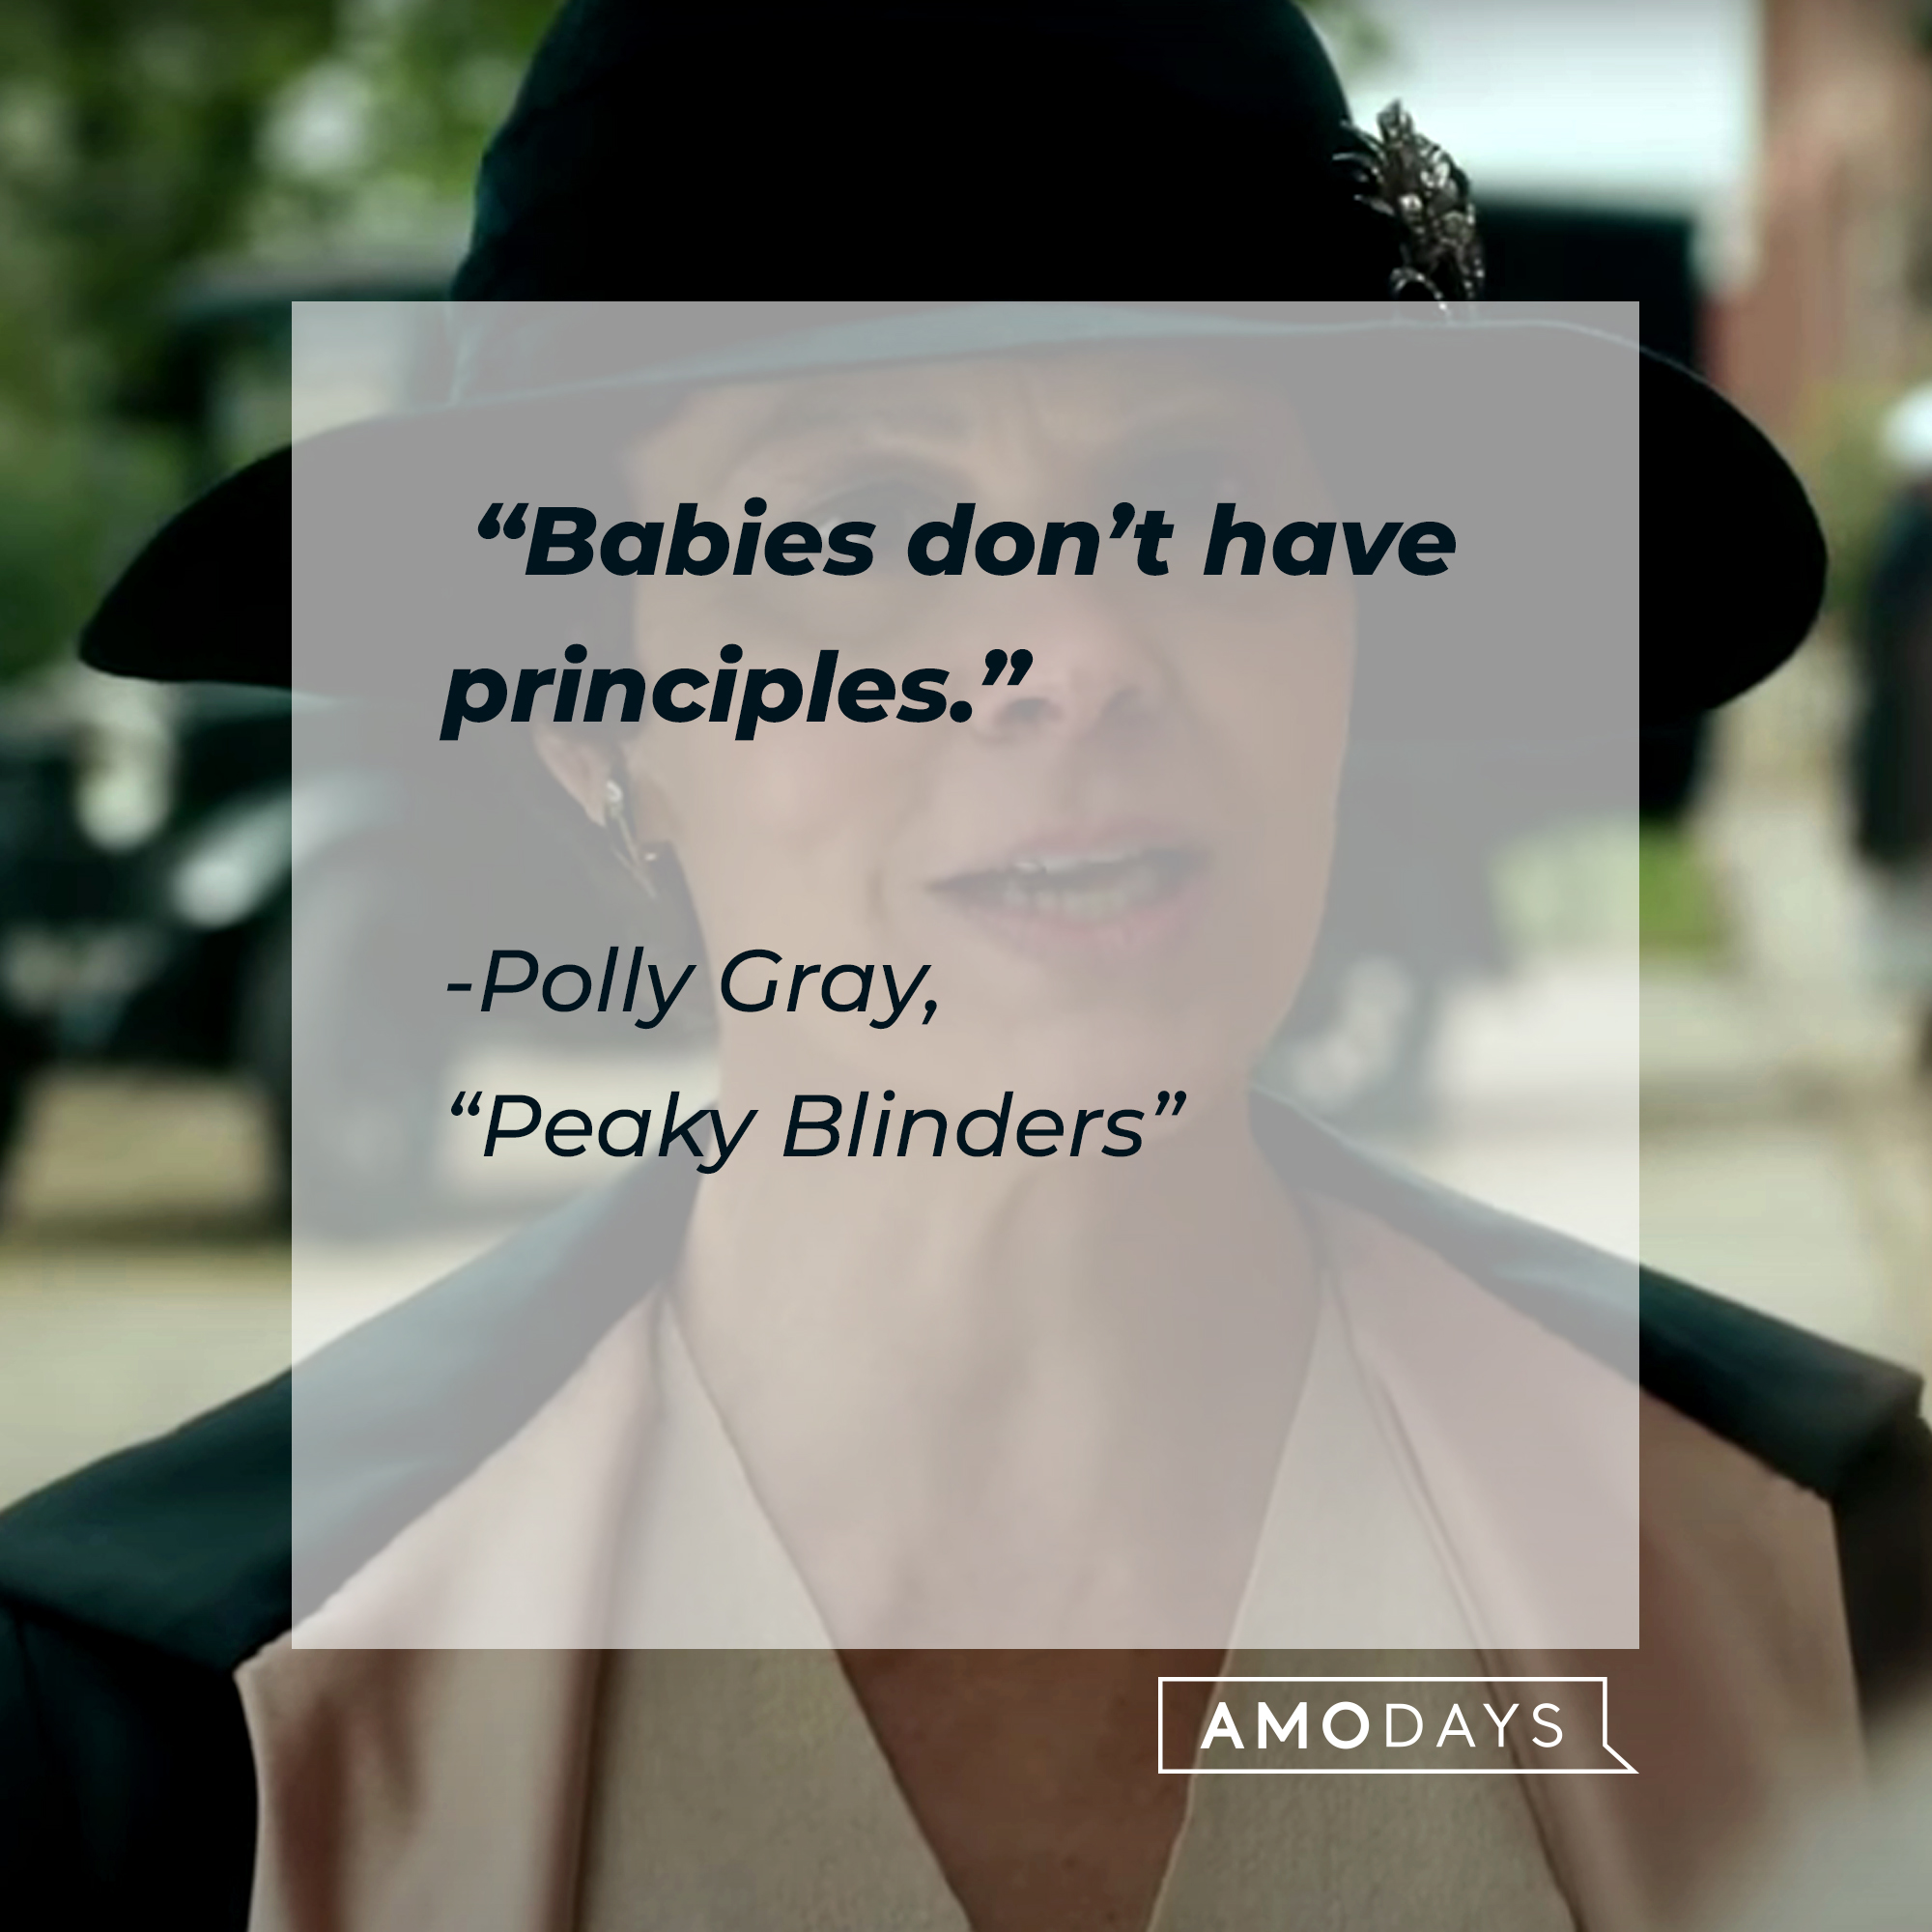 Polly Gray’s quote from “Peaky Blinders”: “Babies don’t have principles.” | Source: Youtube.com/BBC